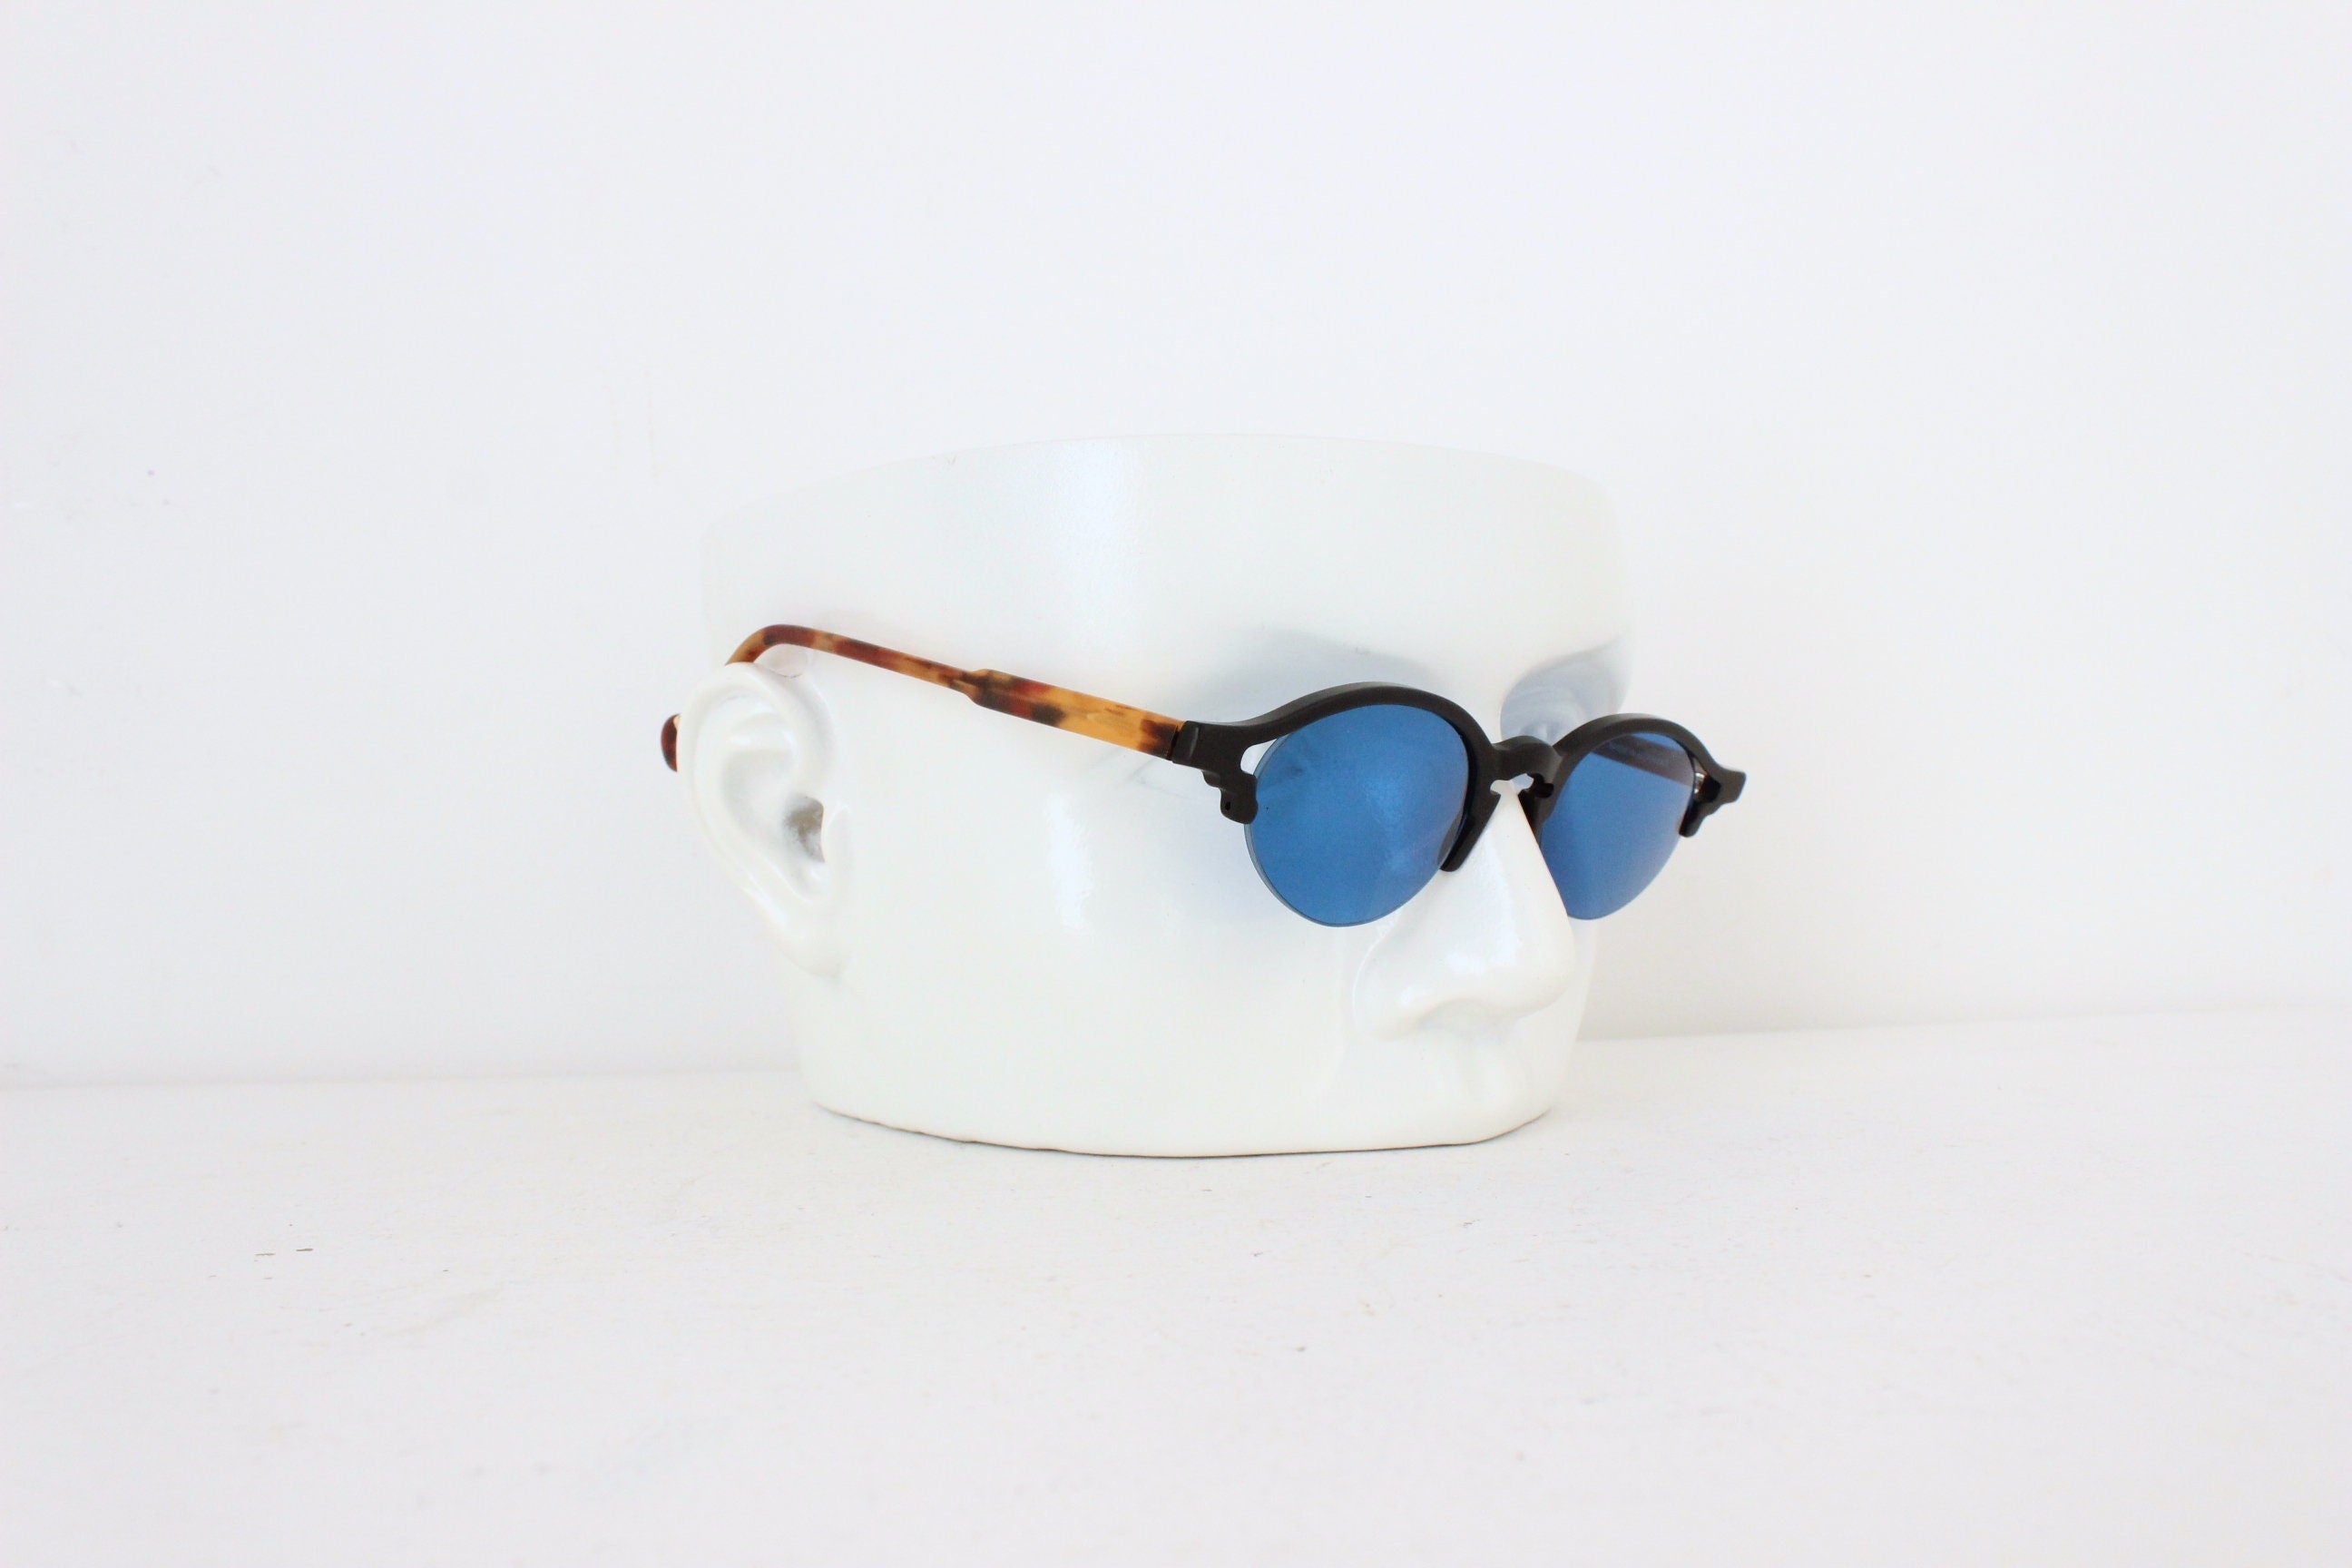 Funky 1990s Blue Lens Sunglasses by Eschenbach Germany